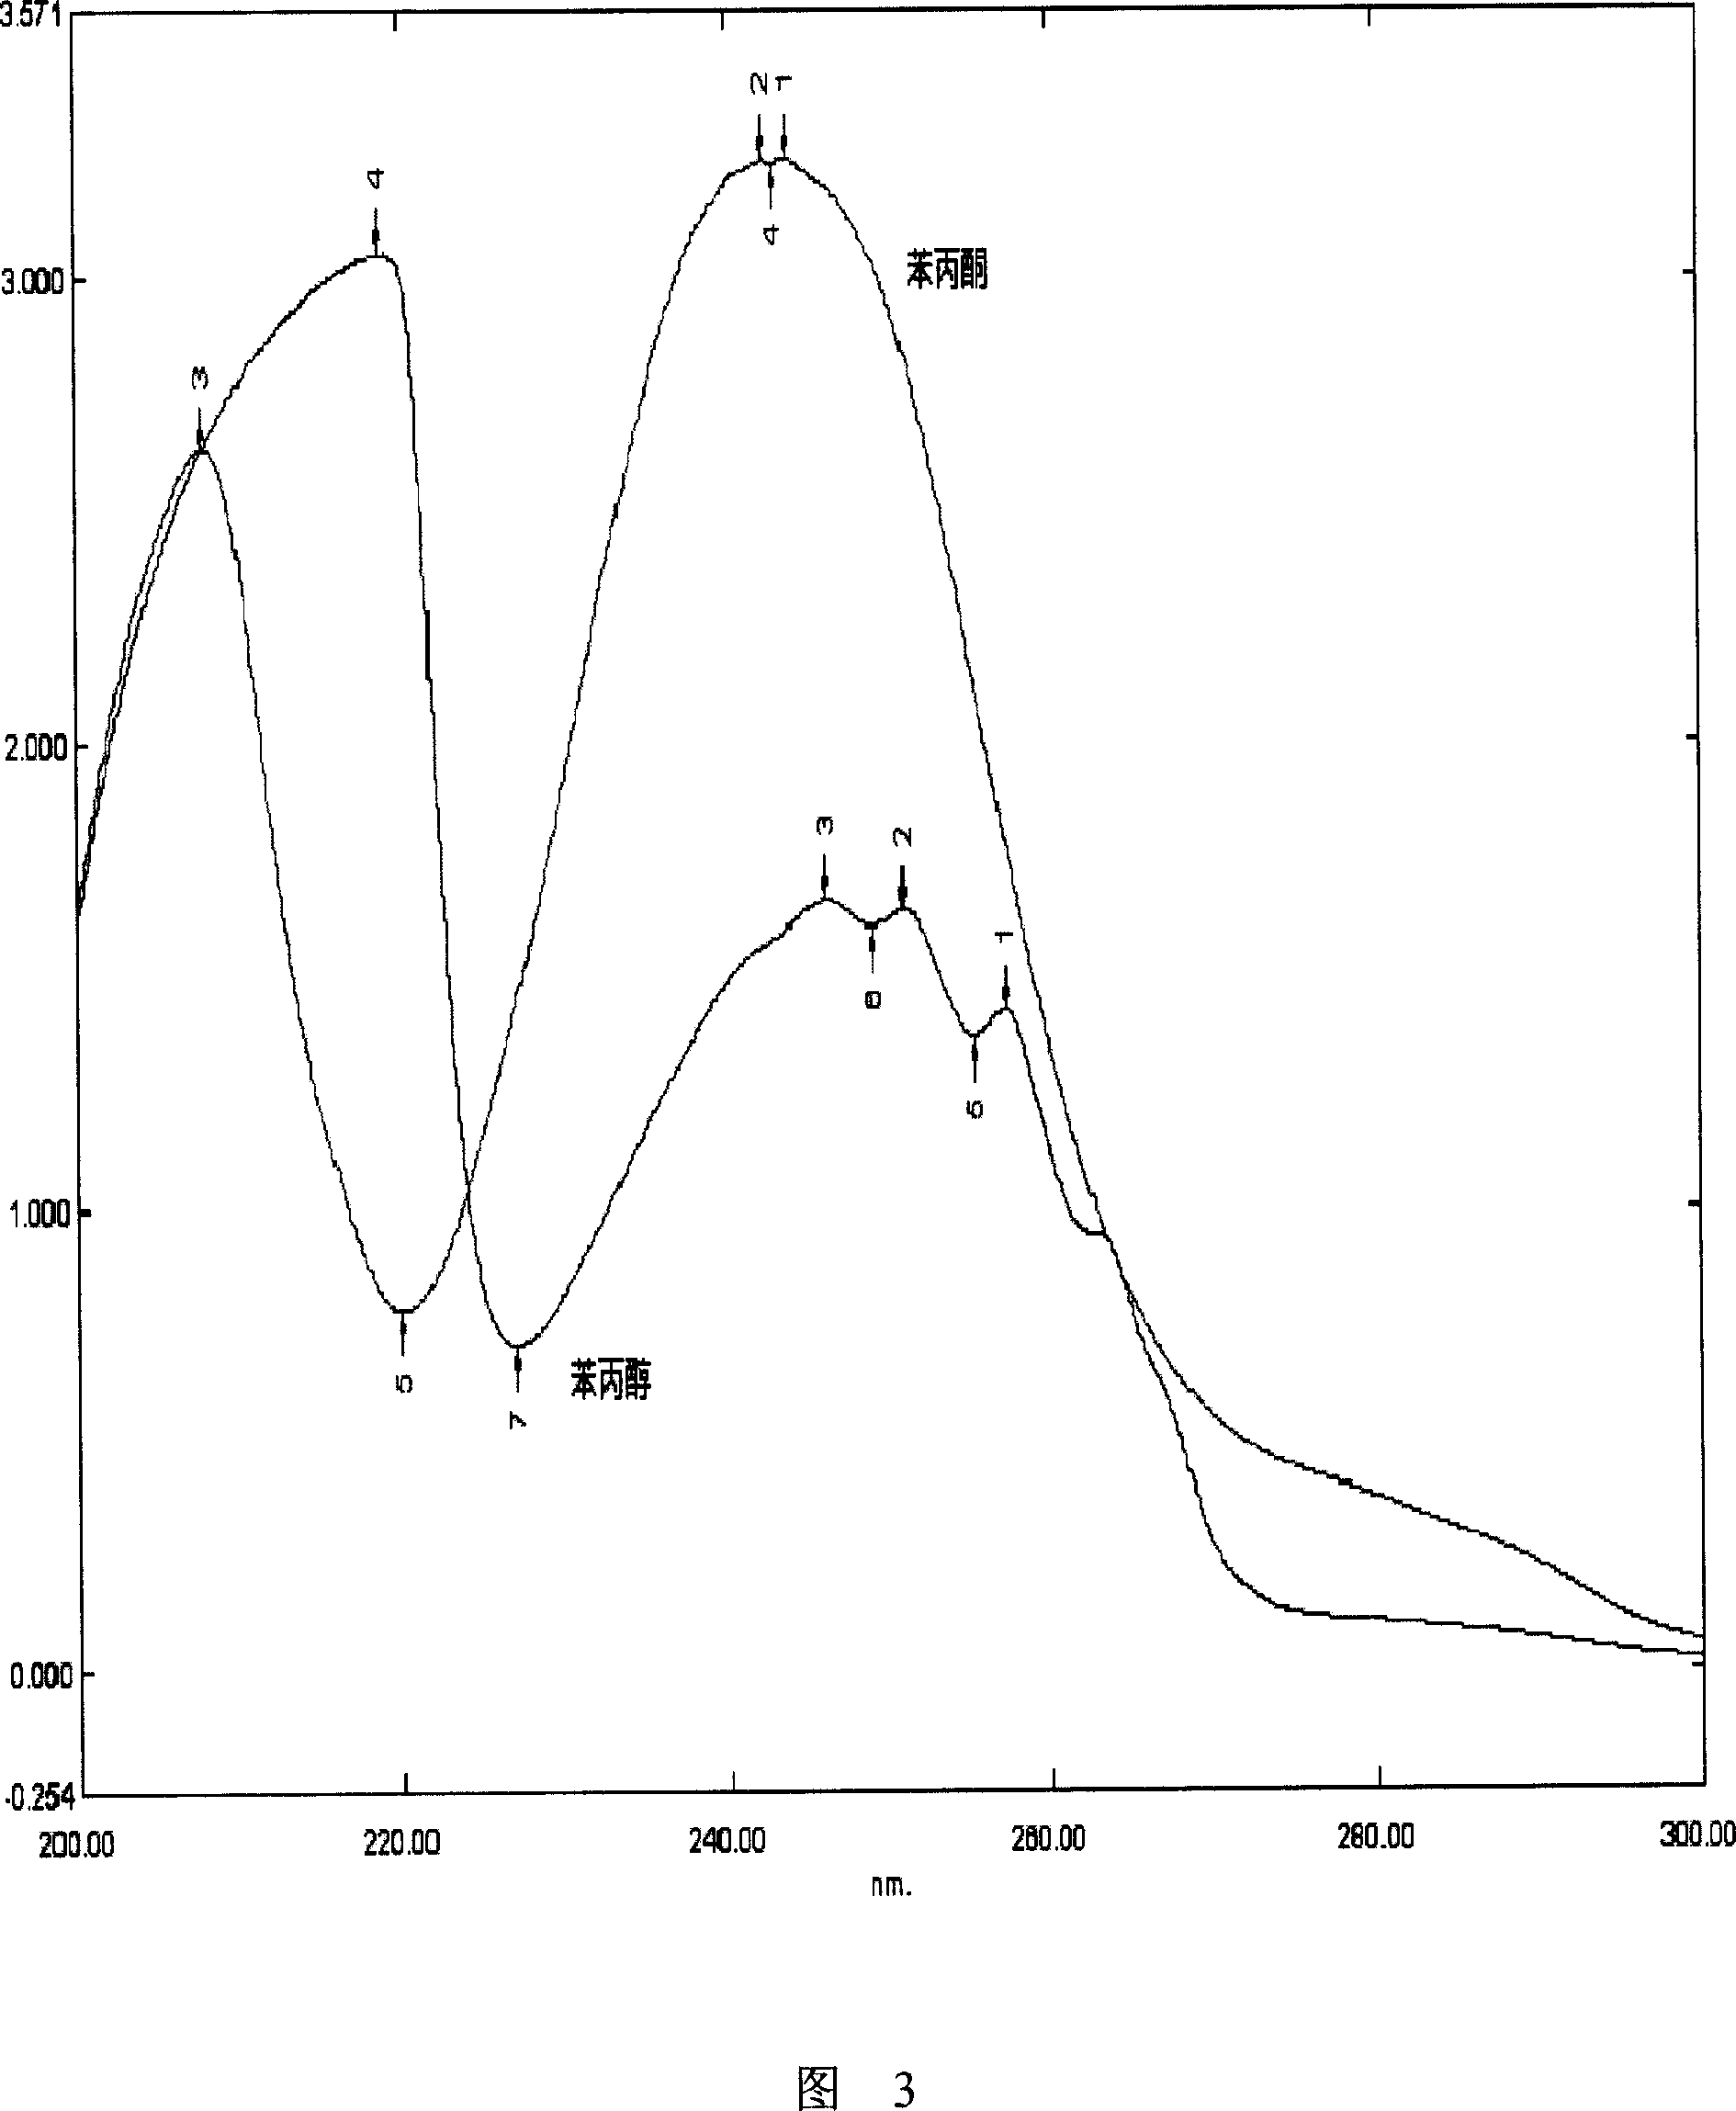 UV spectrophotometry and HPLC combined method for determining content of phenylpropanol